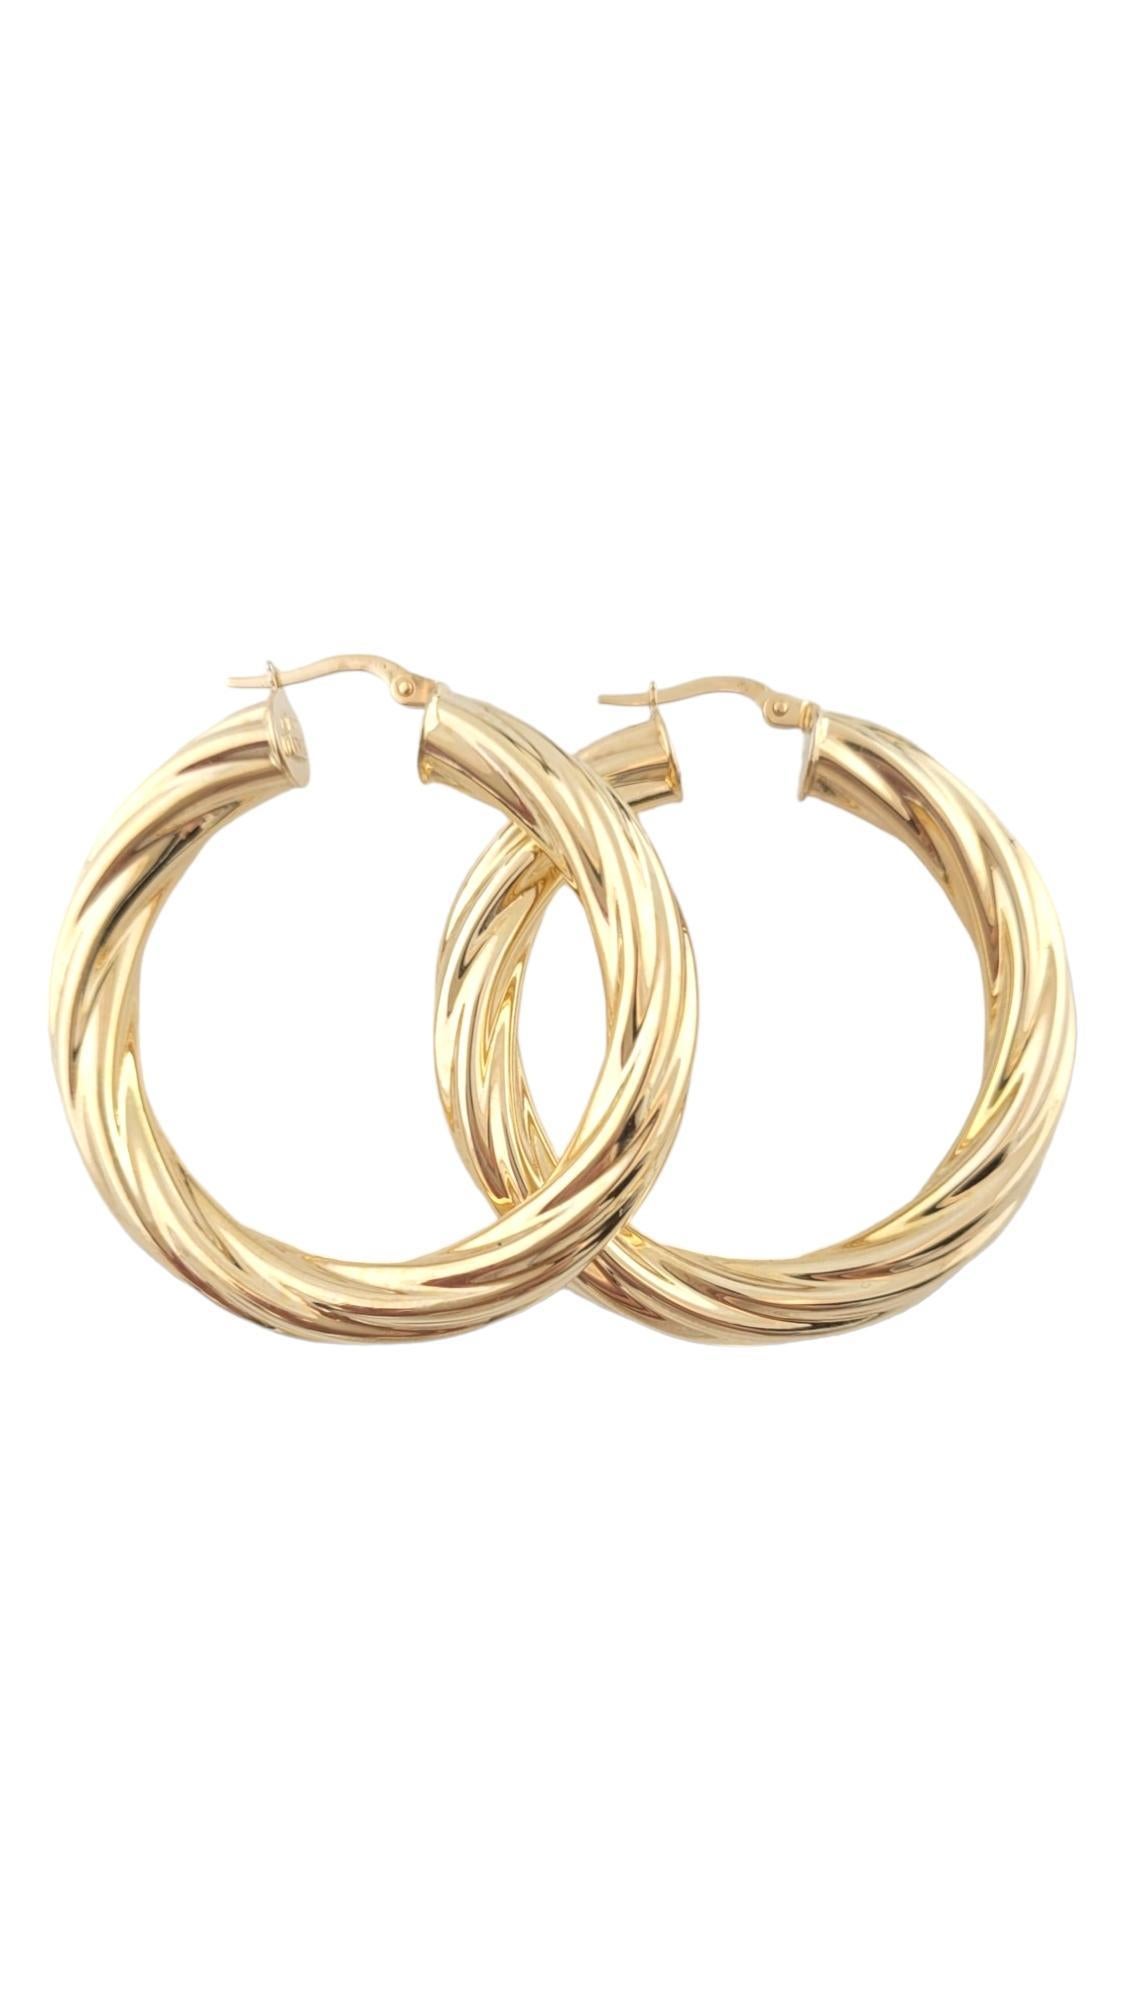 Vintage 14K Yellow Gold Twisted Circle Hoop Earrings 

This gorgeous set of circle hoops are crafted from 14K yellow gold and set in a beautiful twisted pattern!

Diameter: 40.87mm
Width: 5.39mm

Weight: 5.0 dwt/ 7.9 g

Hallmark: ITALY 14K

Very